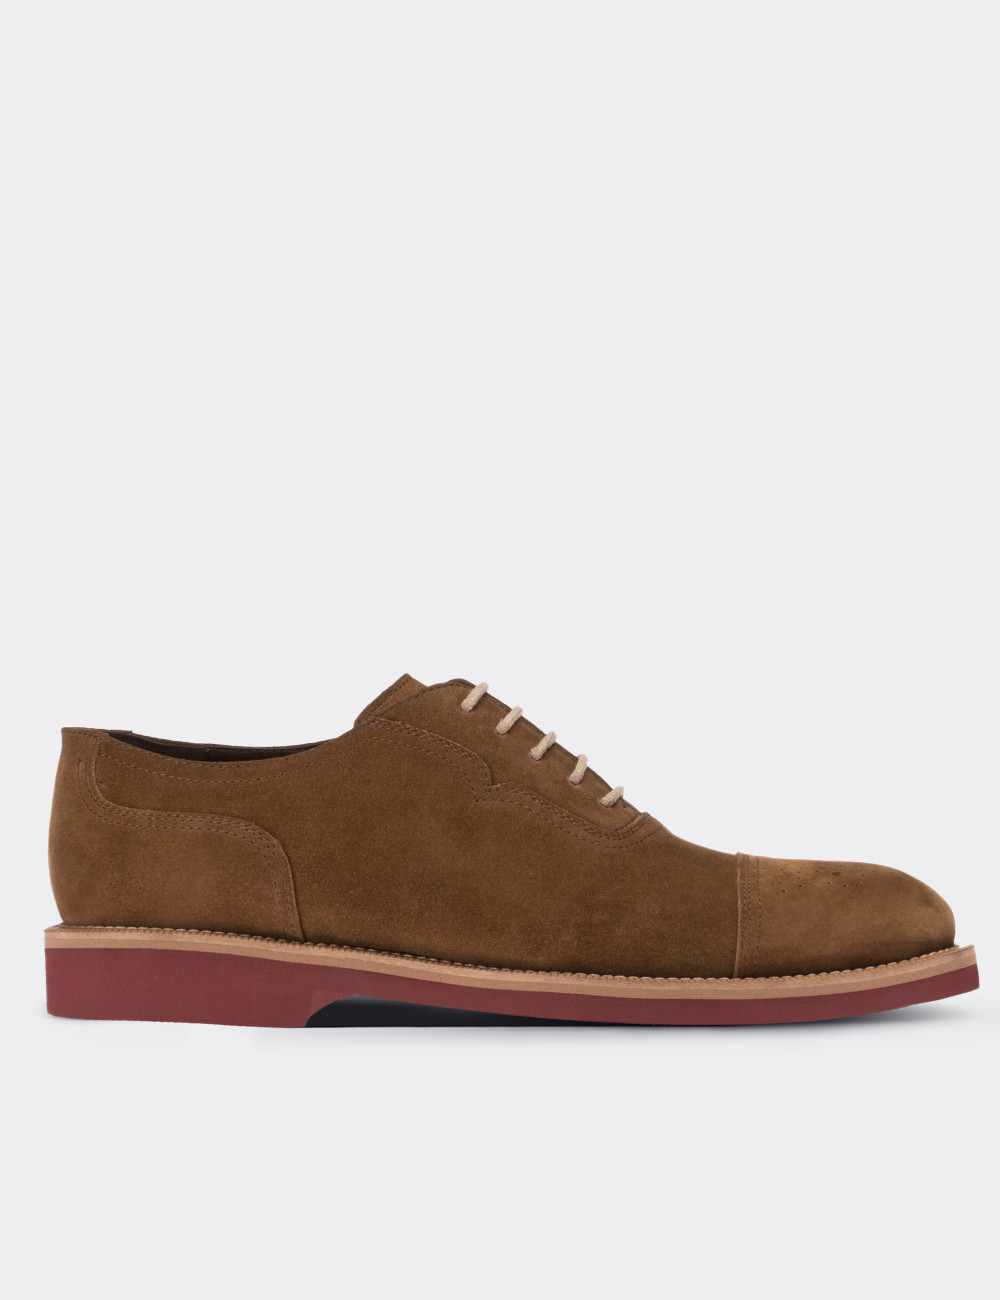 Tan Suede Leather Lace-up Shoes - 01687MTBAE02